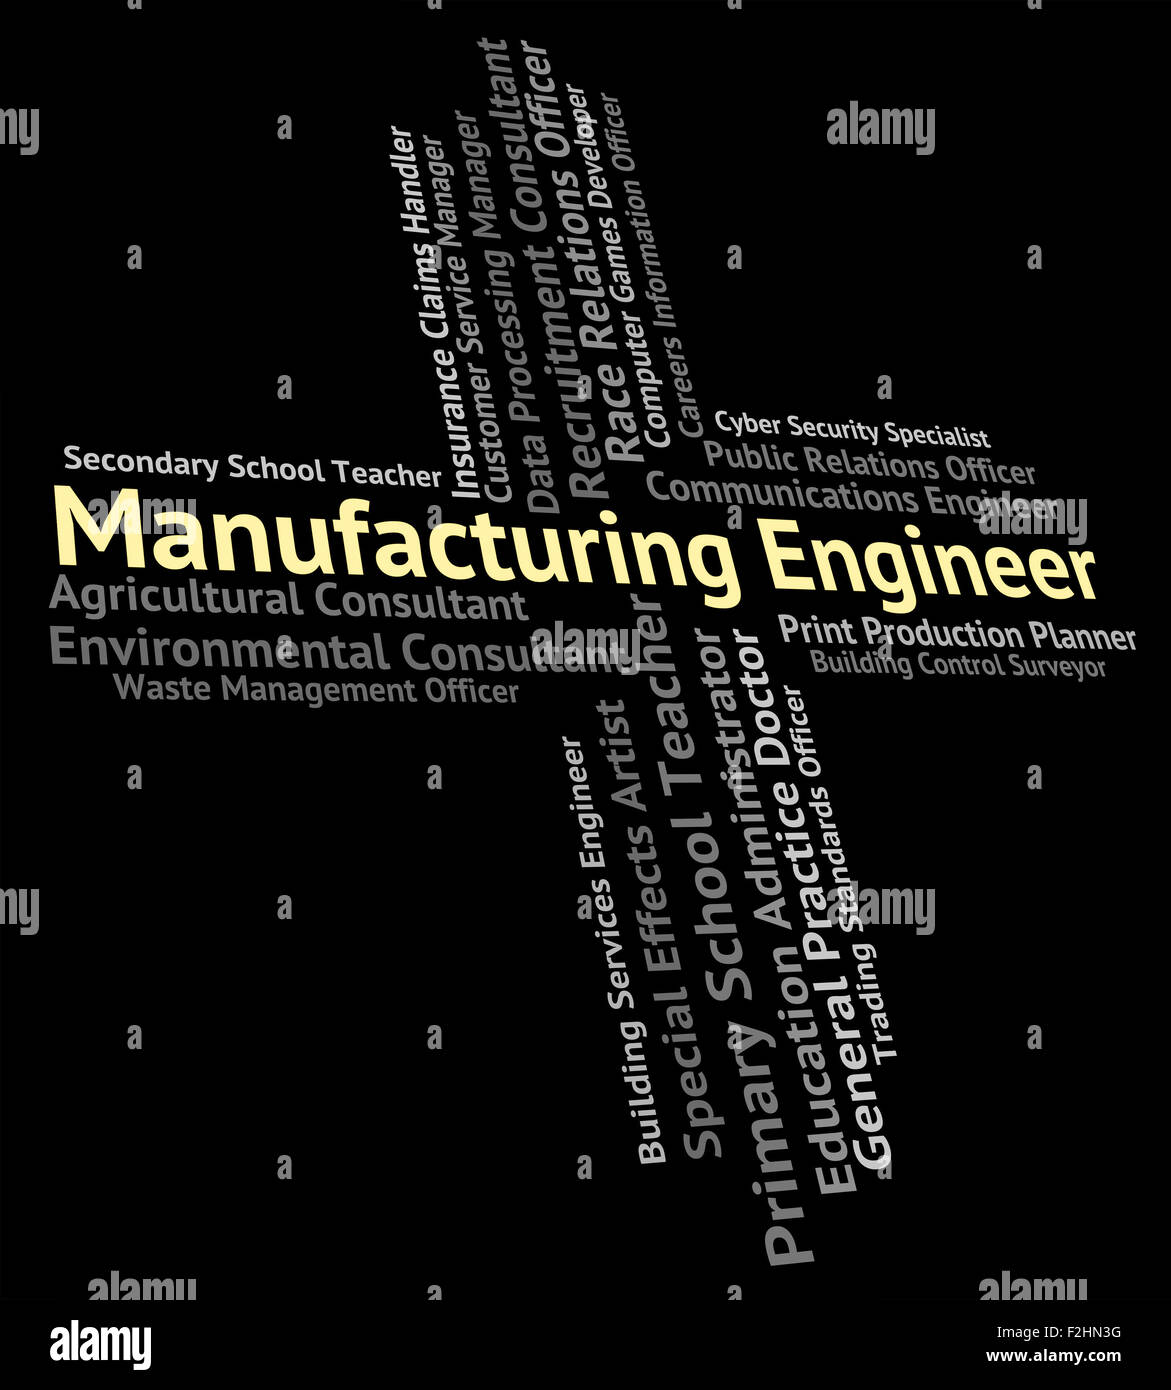 Manufacturing Engineer Meaning Career Mechanics And Export Stock Photo